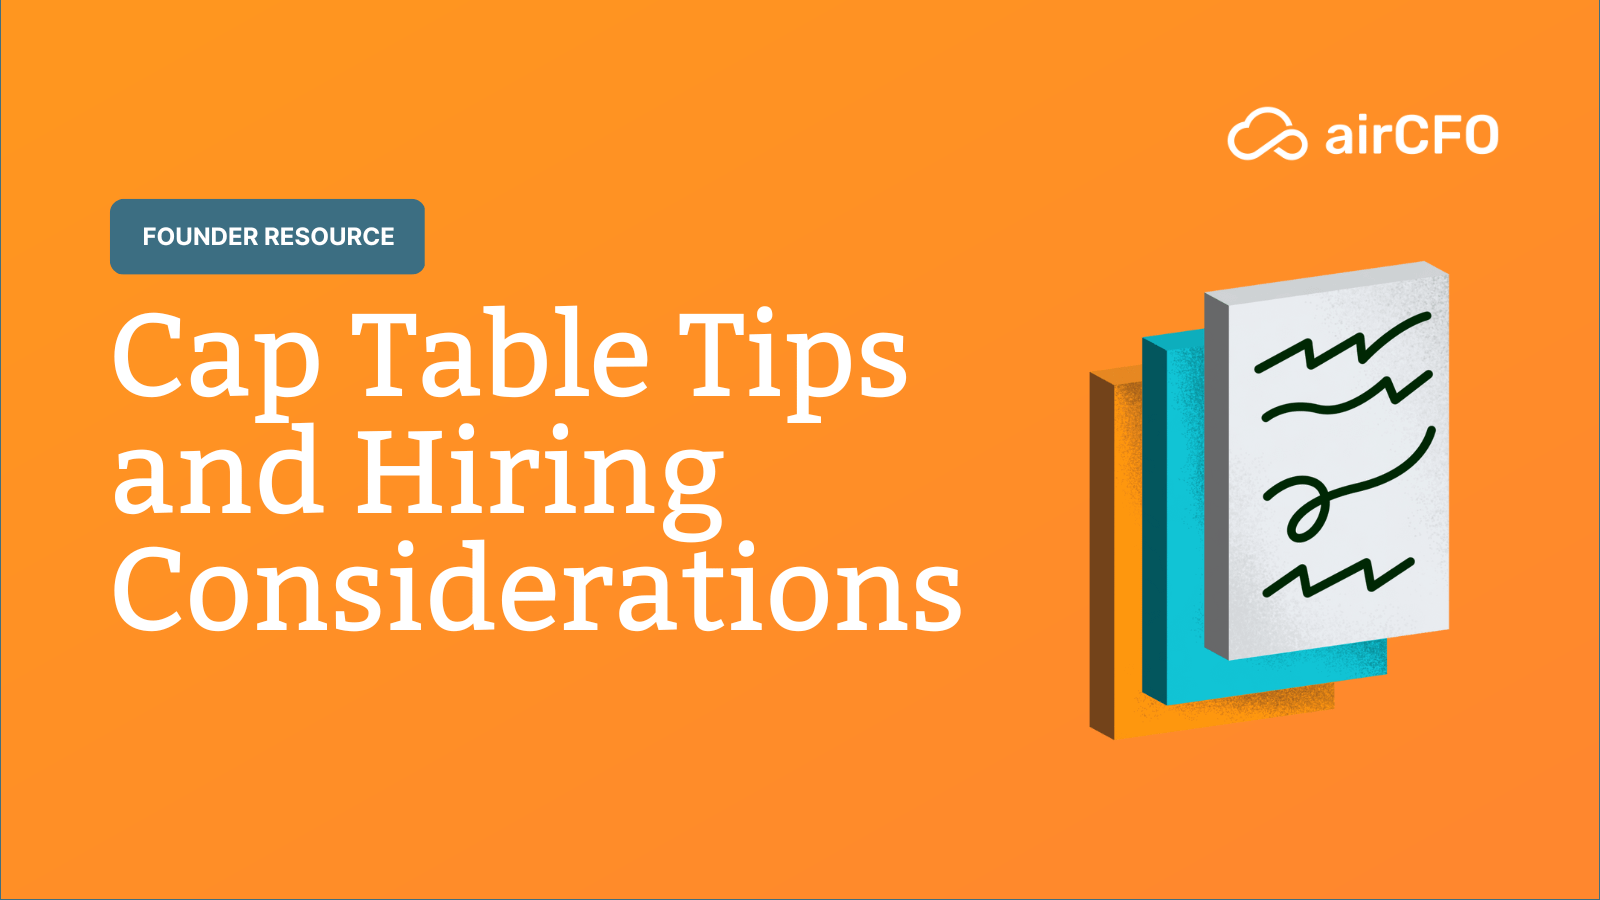 Cap Table Tips and Hiring Considerations